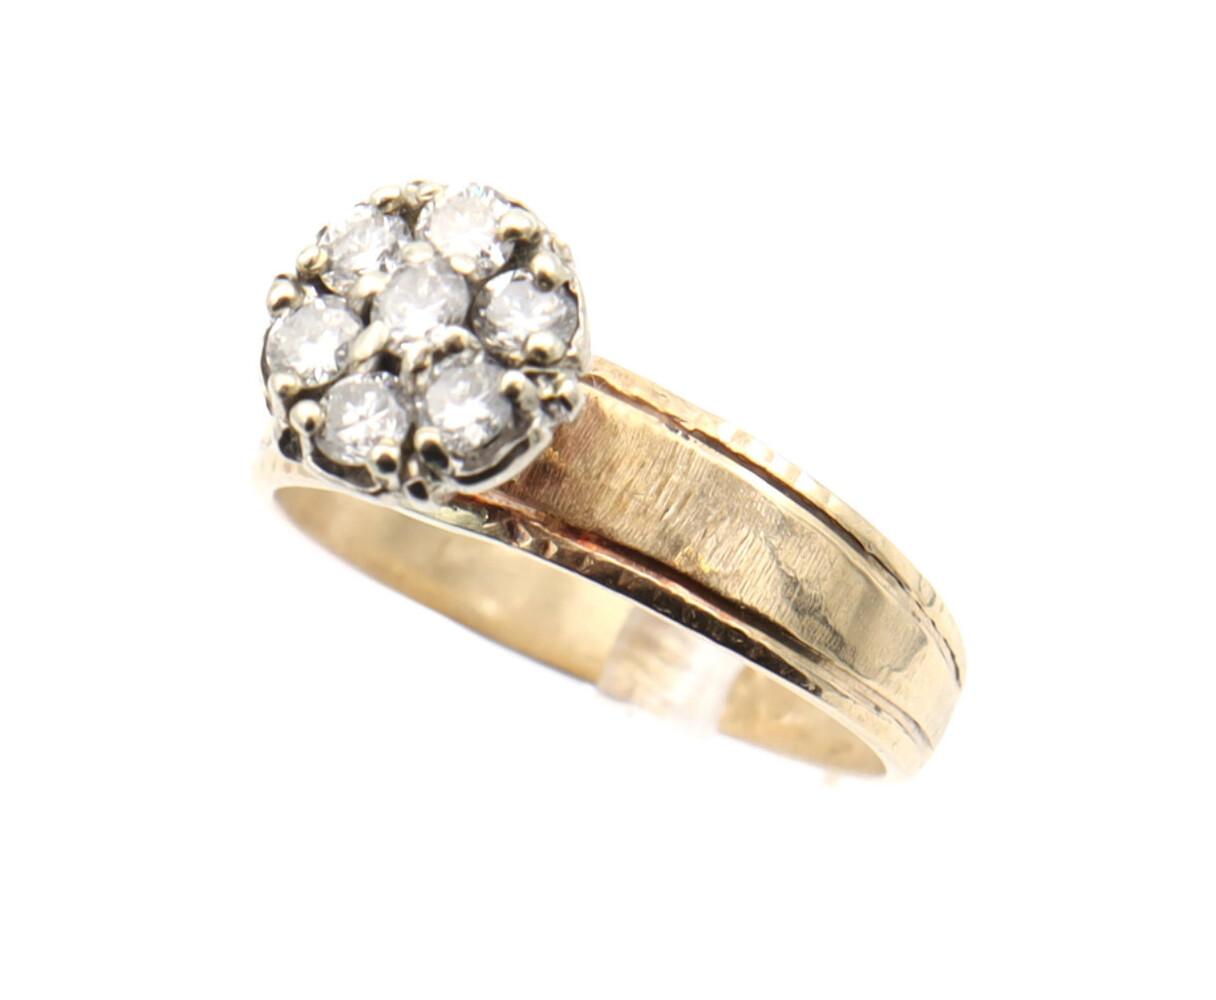  Women's 14KT Yellow Gold Estate 0.40 ctw Round Diamond Floral Cluster Ring Sz 7